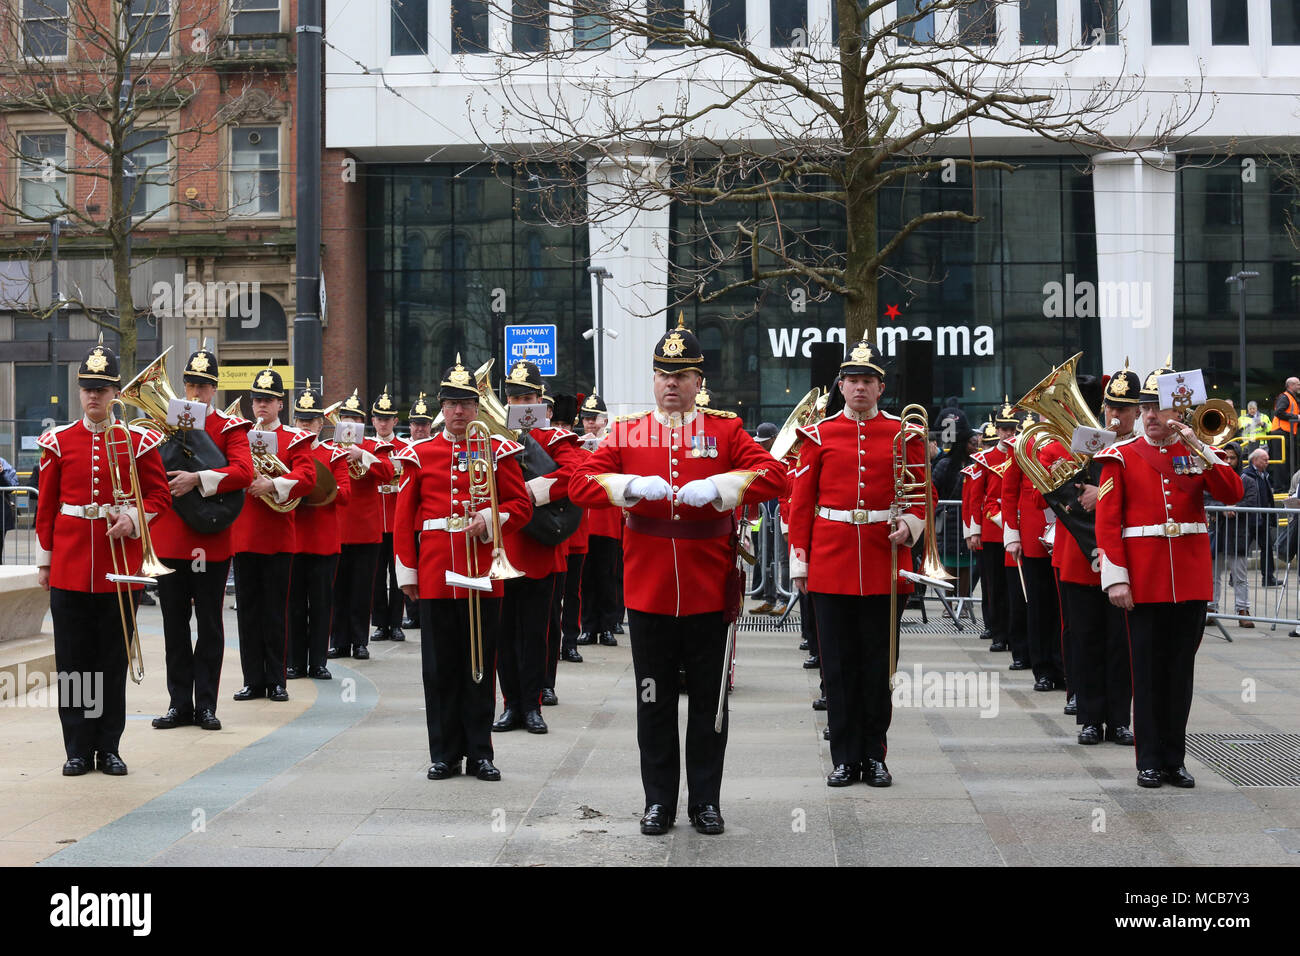 Manchester, UK. 15th Apr, 2018. The Band of The Kings Division at the remembrance Parade and service to commemorate The Battle Of Manchester Hill 100 years ago in France which saw the loss of 79 men, Manchester,15th April, 2018 (C)Barbara Cook/Alamy Live News Credit: Barbara Cook/Alamy Live News Stock Photo